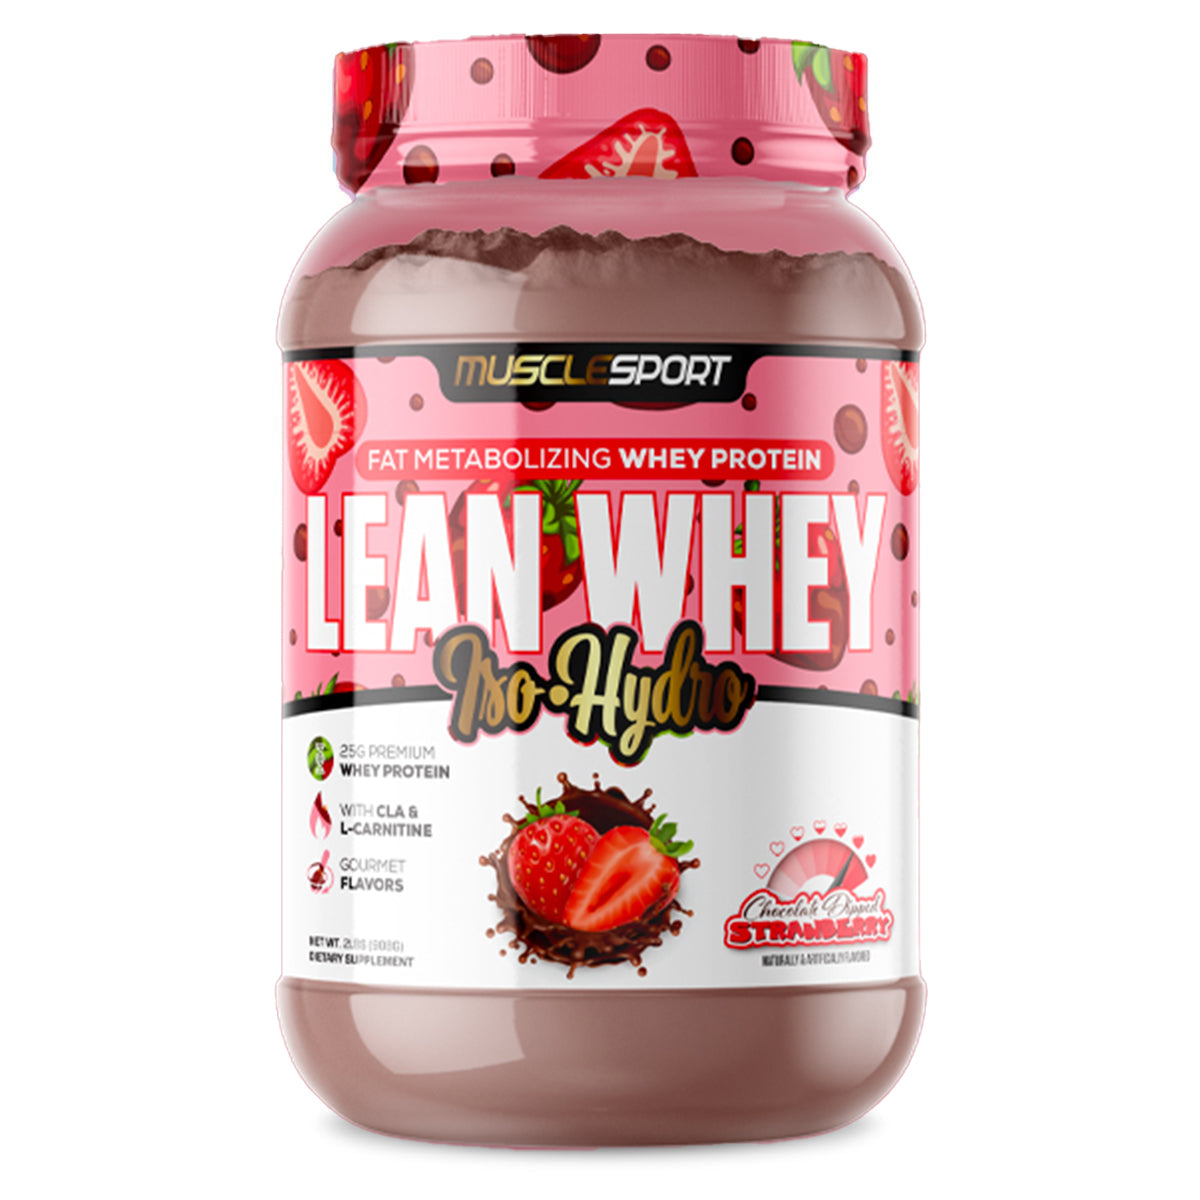 MUSCLESPORT Lean Whey chocolate dipped strawberry 2lb bottle